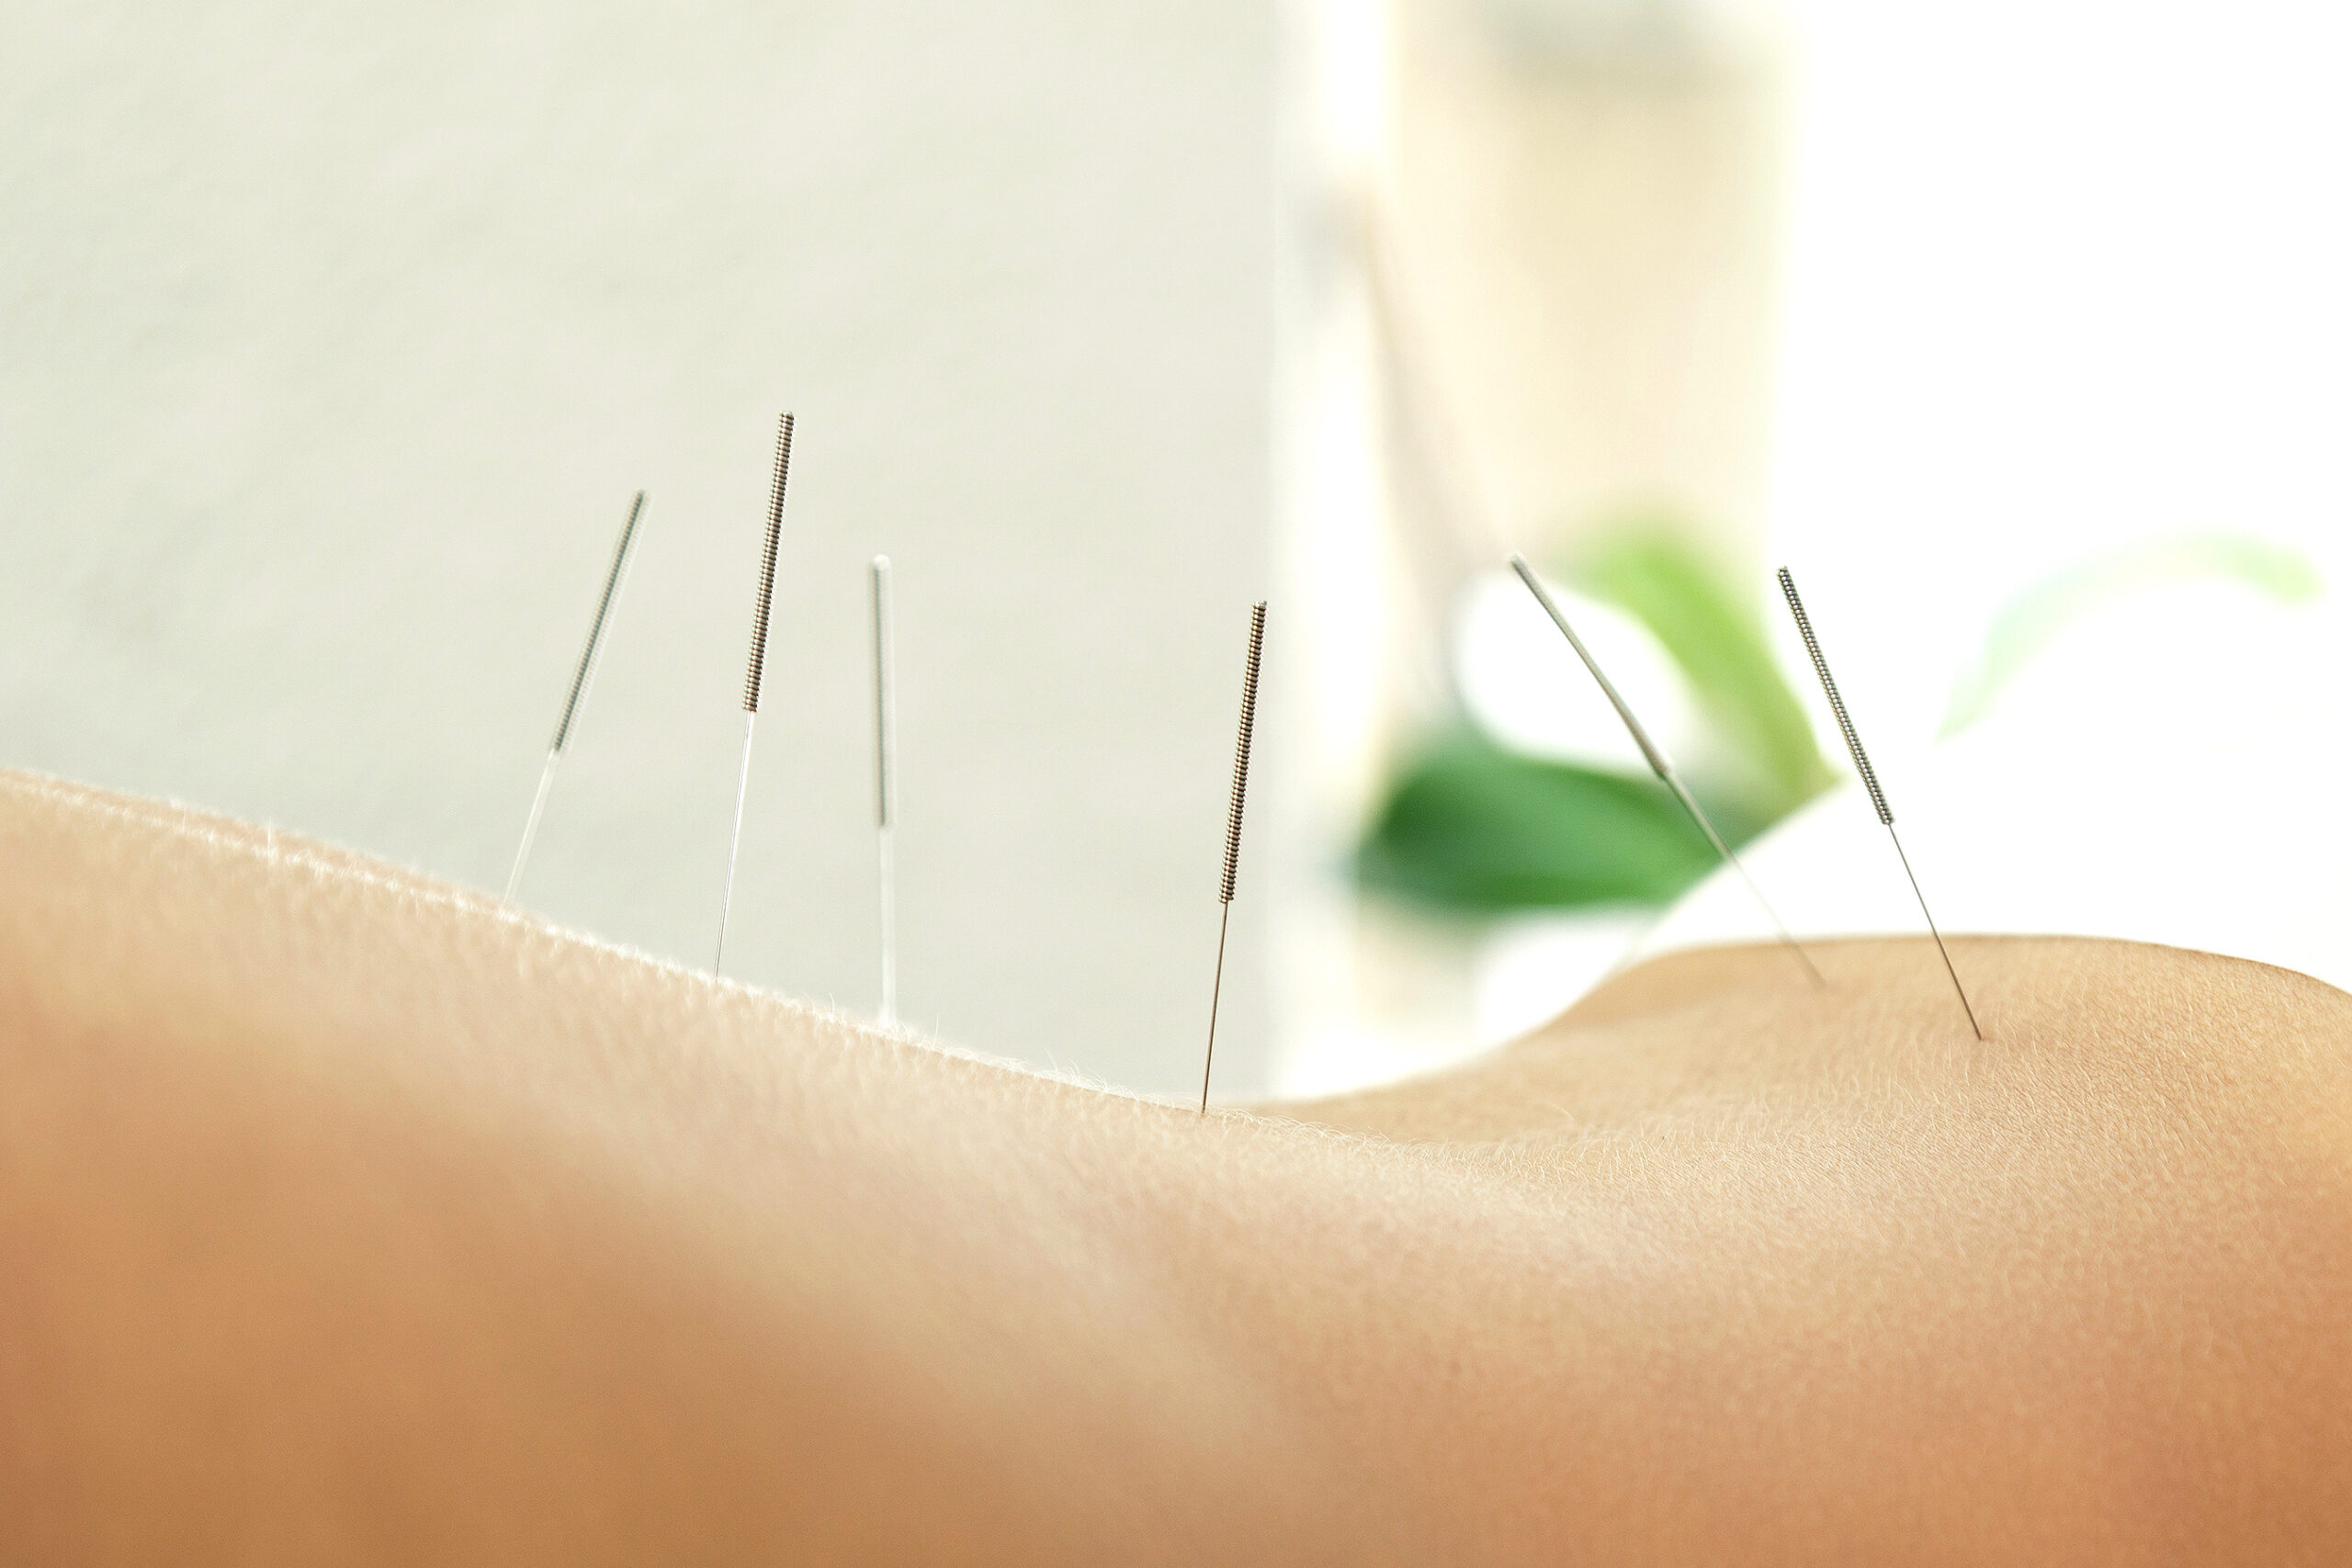 Alternative medicine. Close-up of female back with steel needles during procedure of acupuncture therapy.